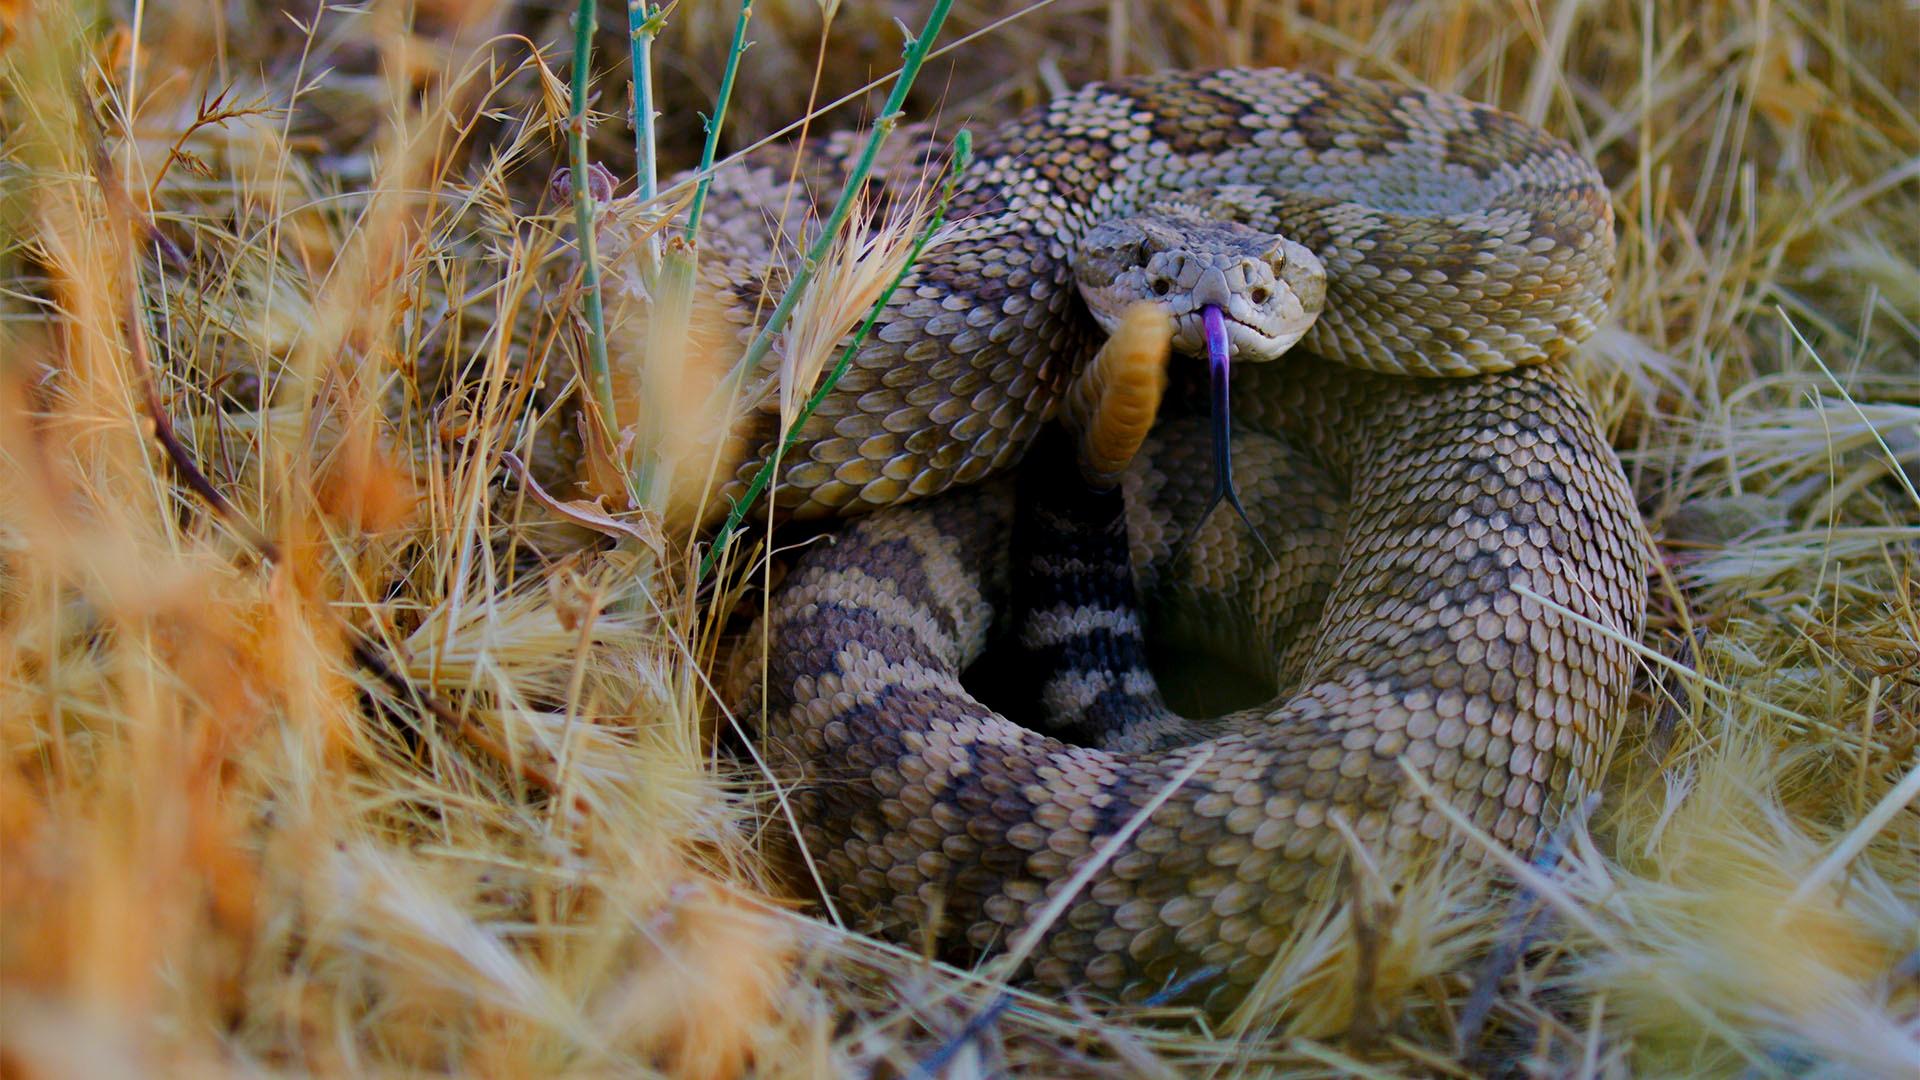 A rattlesnake in Central California